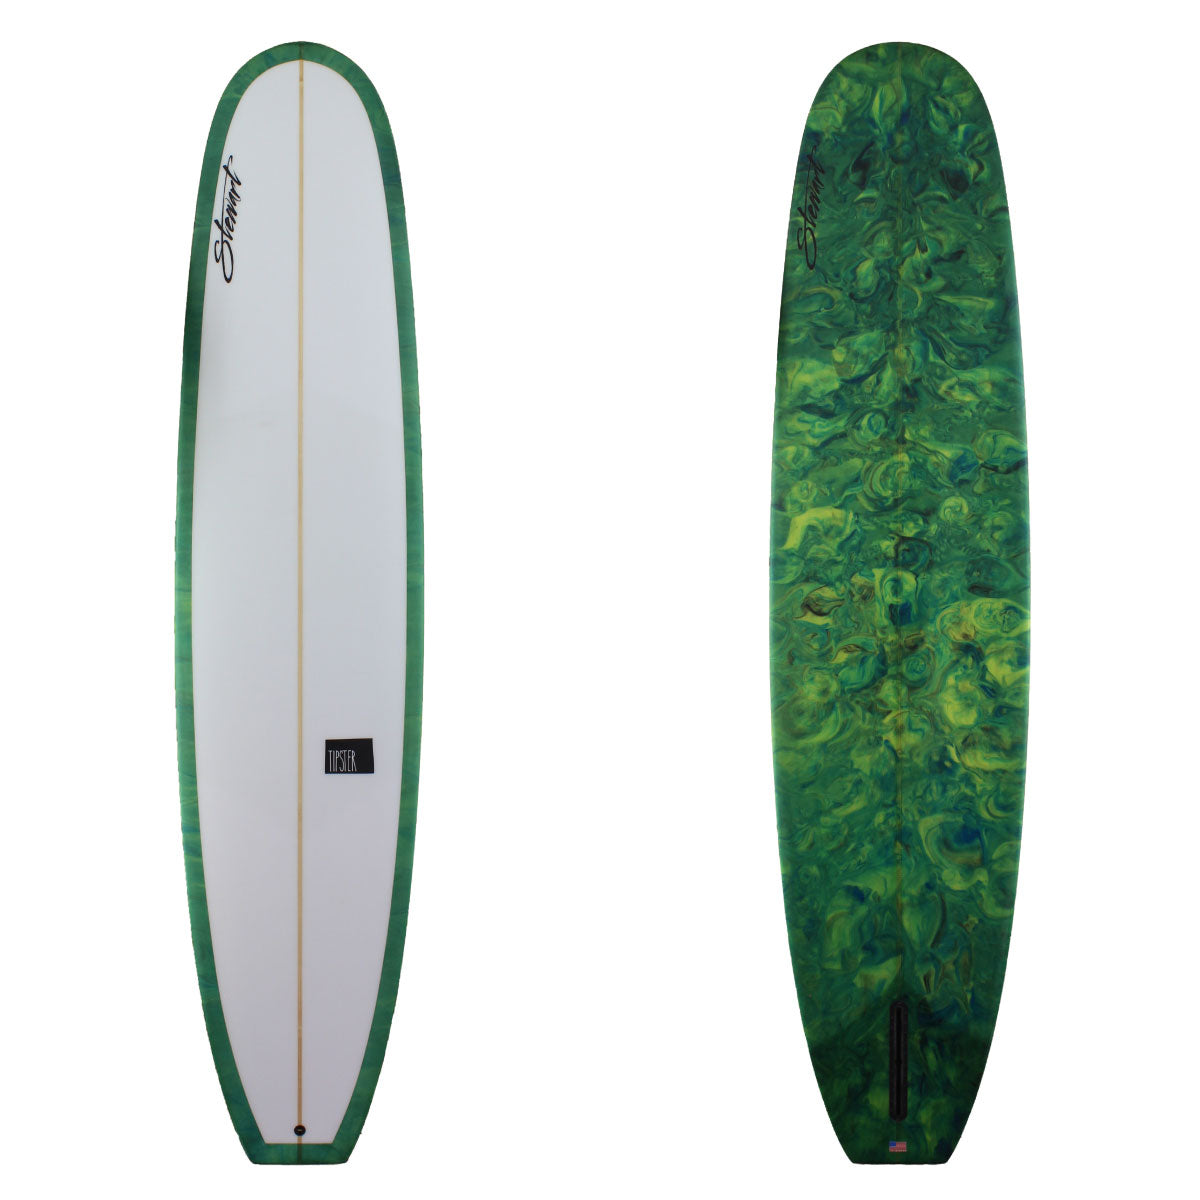 Stewart Surfboards 9'3 TIPSTER with green black resin swirl bottom and rails, clear white deck